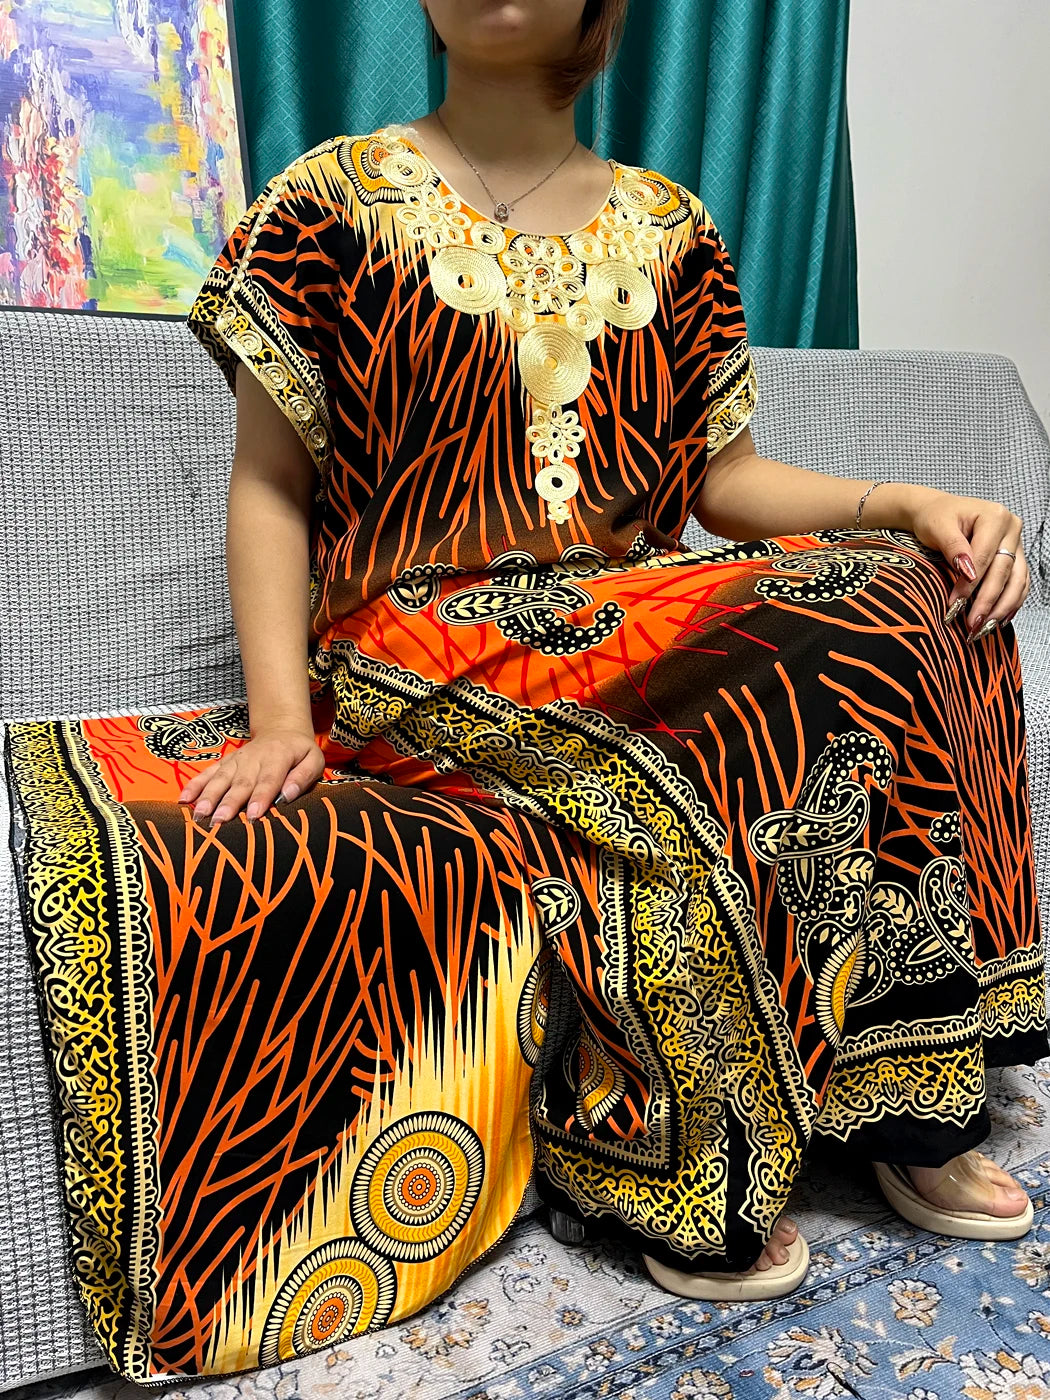 Women Print Appliques Cotton Traditional Kanga Clothing Loose Femme Robe African Nigeria Dresses With Turban - Flexi Africa - Flexi Africa offers Free Delivery Worldwide - Vibrant African traditional clothing showcasing bold prints and intricate designs